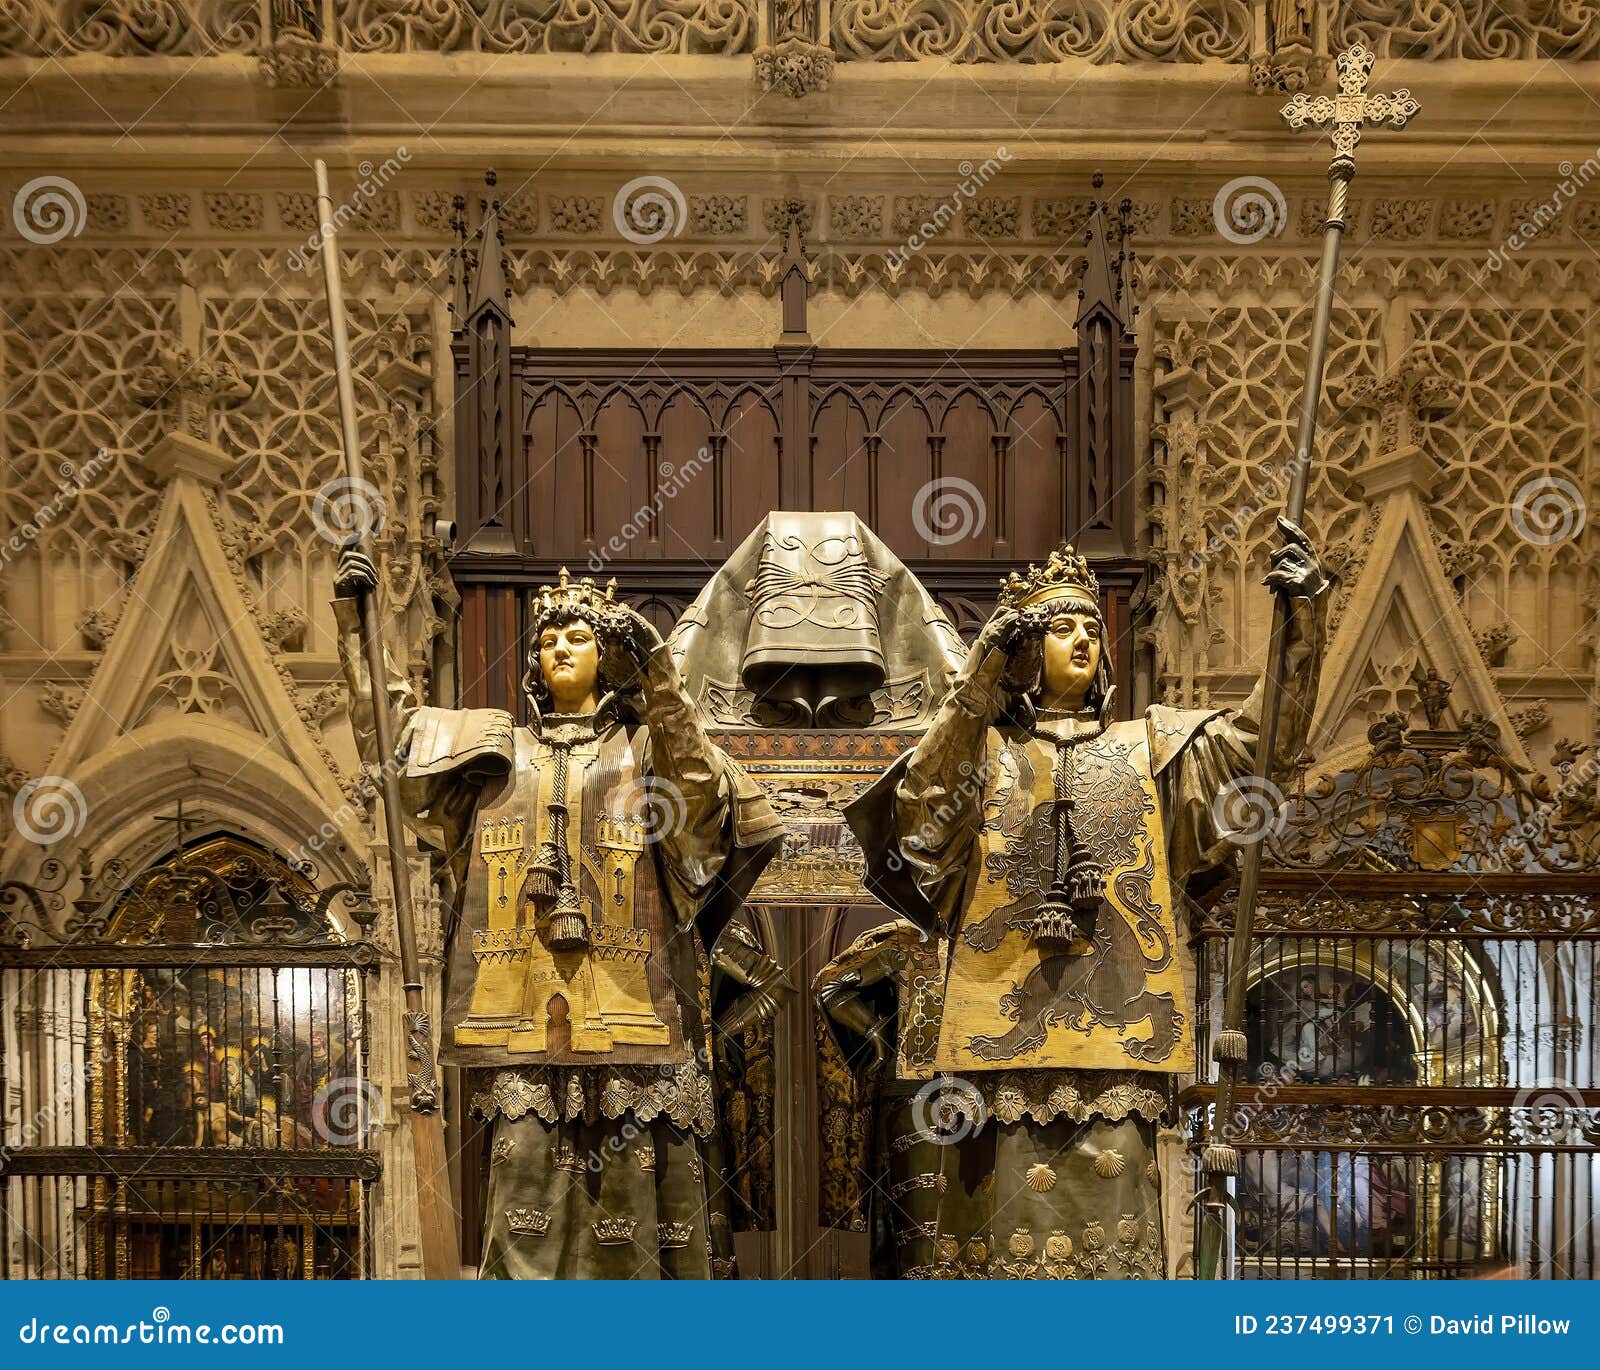 tomb of christopher columbus by sculptor arturo melida in the seville cathedral in spain.